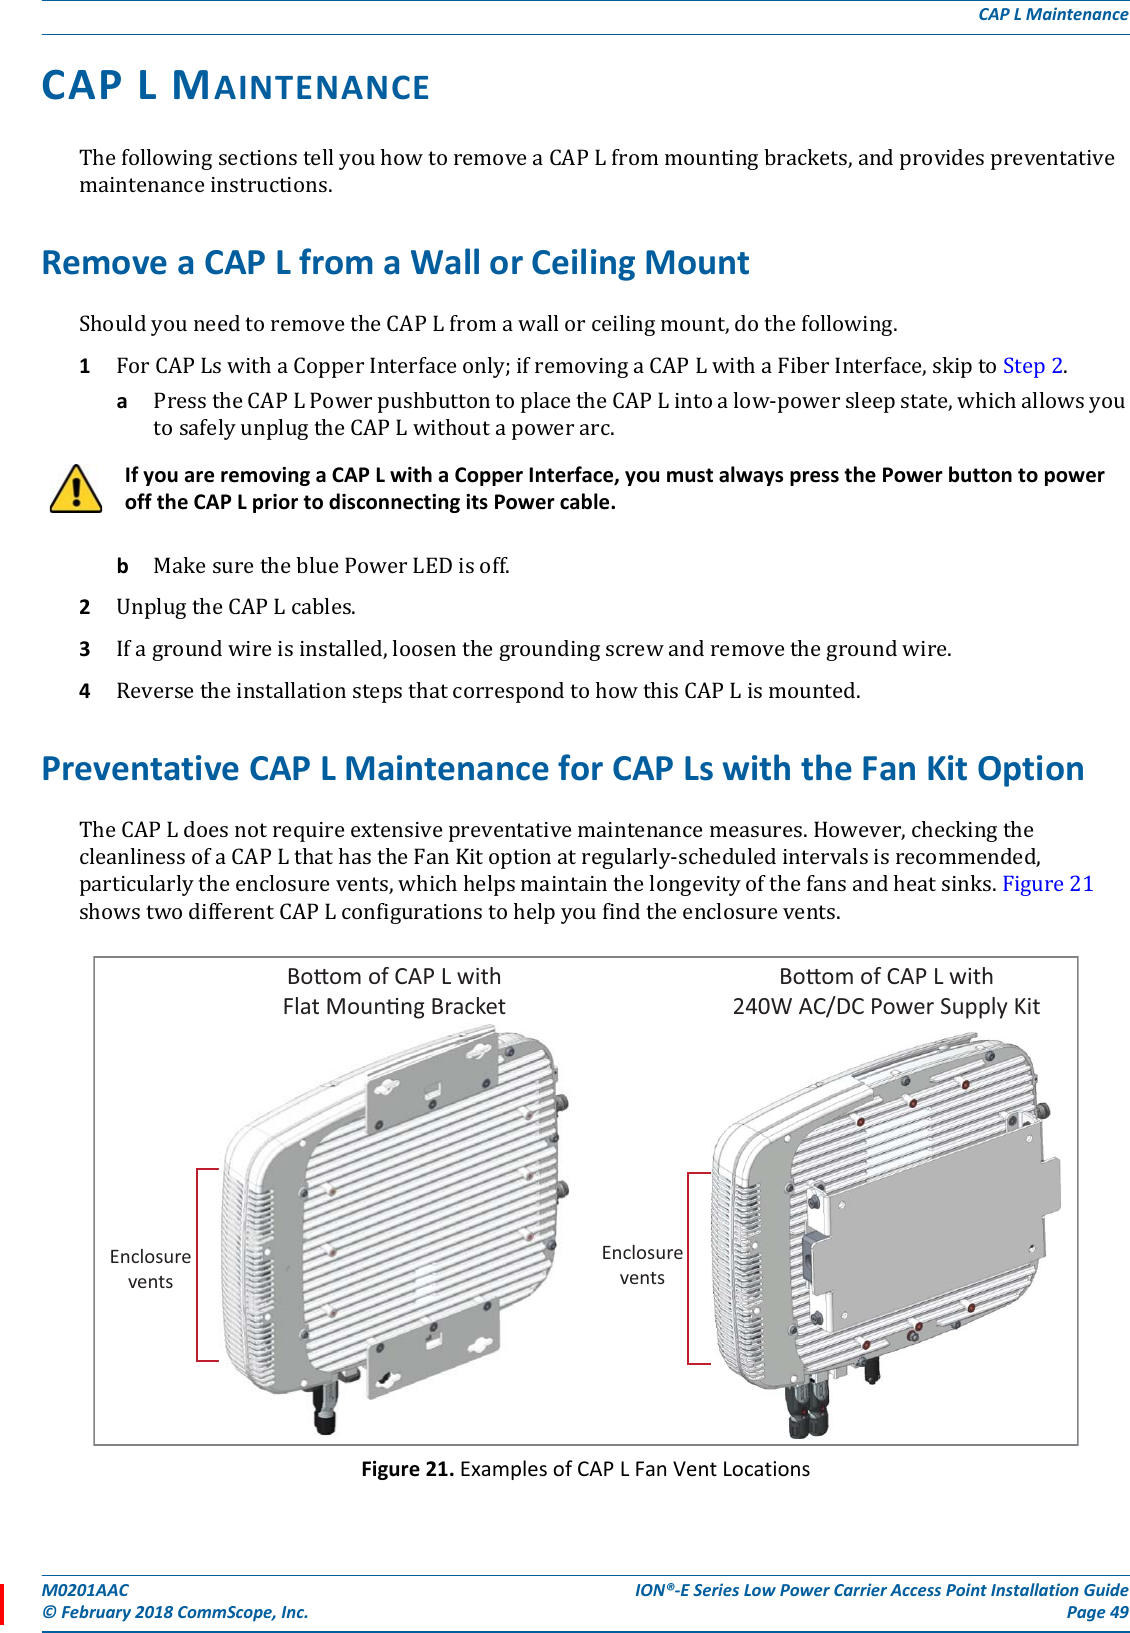 M0201AAC ION®-E Series Low Power Carrier Access Point Installation Guide© February 2018 CommScope, Inc. Page 49CAP L MaintenanceCAP L MAINTENANCE ThefollowingsectionstellyouhowtoremoveaCAPLfrommountingbrackets,andprovidespreventativemaintenanceinstructions.Remove a CAP L from a Wall or Ceiling MountShouldyouneedtoremovetheCAPLfromawallorceilingmount,dothefollowing.1ForCAPLswithaCopperInterfaceonly;ifremovingaCAPLwithaFiberInterface,skiptoStep2.aPresstheCAPLPowerpushbuttontoplacetheCAPLintoalow-powersleepstate,whichallowsyoutosafelyunplugtheCAPLwithoutapowerarc.bMakesurethebluePowerLEDisoff.2UnplugtheCAPLcables.3Ifagroundwireisinstalled,loosenthegroundingscrewandremovethegroundwire.4ReversetheinstallationstepsthatcorrespondtohowthisCAPLismounted.Preventative CAP L Maintenance for CAP Ls with the Fan Kit OptionTheCAPLdoesnotrequireextensivepreventativemaintenancemeasures.However,checkingthecleanlinessofaCAPLthathastheFanKitoptionatregularly-scheduledintervalsisrecommended,particularlytheenclosurevents,whichhelpsmaintainthelongevityofthefansandheatsinks.Figure21showstwodifferentCAPLconfigurationstohelpyoufindtheenclosurevents.Figure 21. Examples of CAP L Fan Vent LocationsIf you are removing a CAP L with a Copper Interface, you must always press the Power button to power off the CAP L prior to disconnecting its Power cable.EnclosureventsBoom of CAP L with240W AC/DC Power Supply KitBoom of CAP L withFlat Mounng BracketEnclosurevents